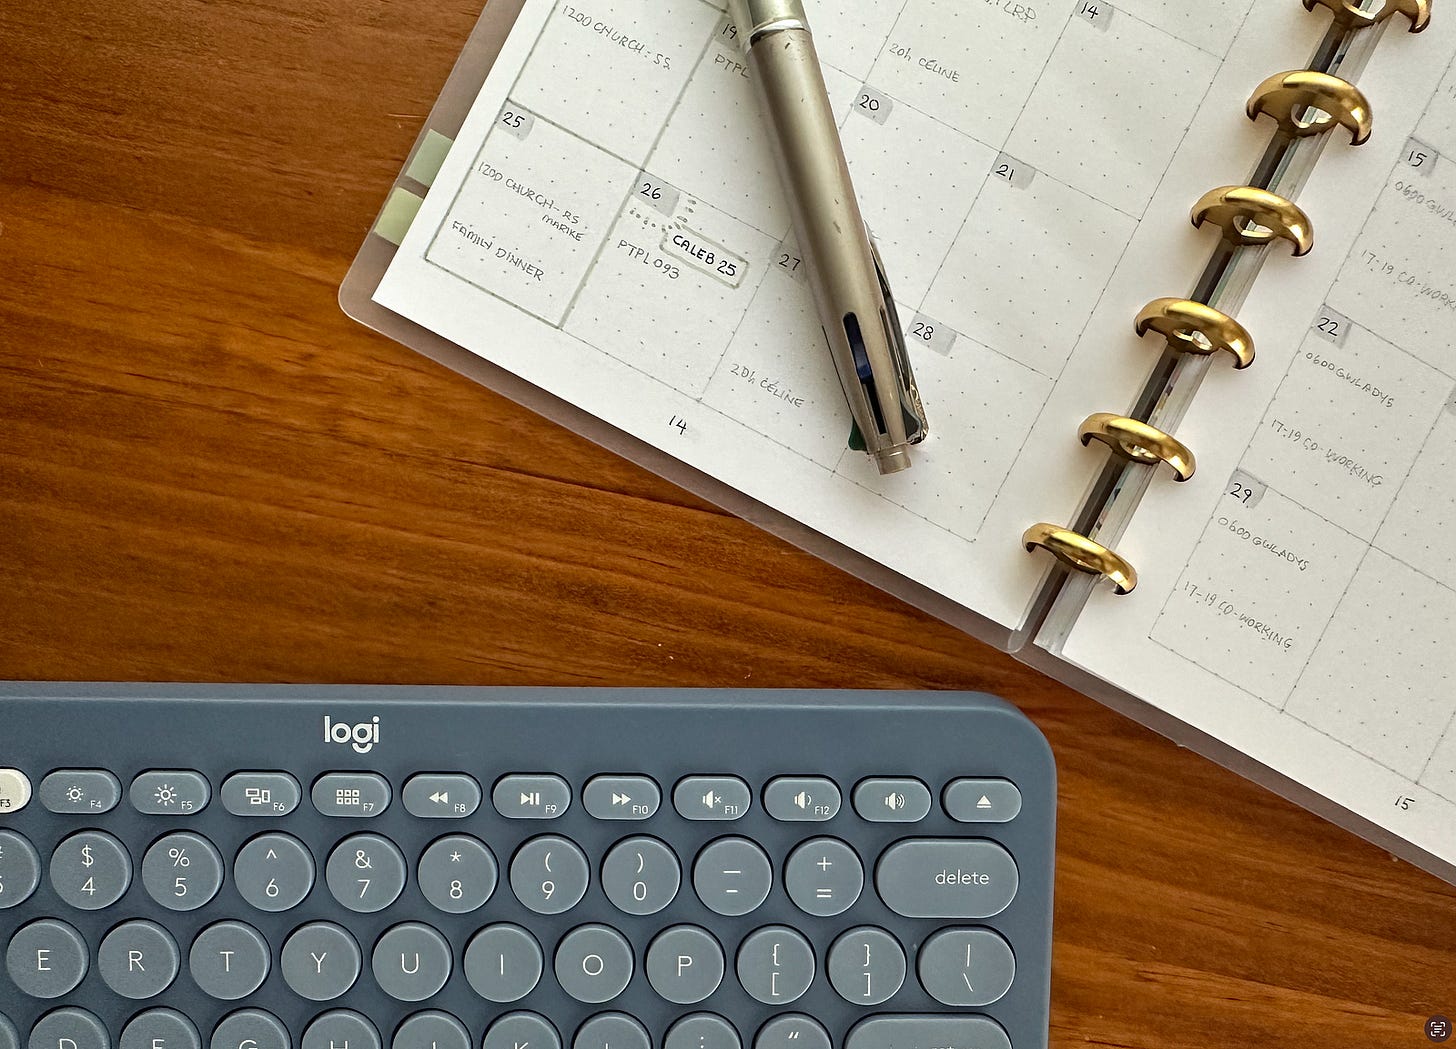 Blue-grey ‘logi’ keyboard and a discbound note book are sitting on a wooden table. We’re looking at a cropped view of them, from above. There’s a Pilot Dr Grip pen (missing its cap) sitting on the left hand planner page.